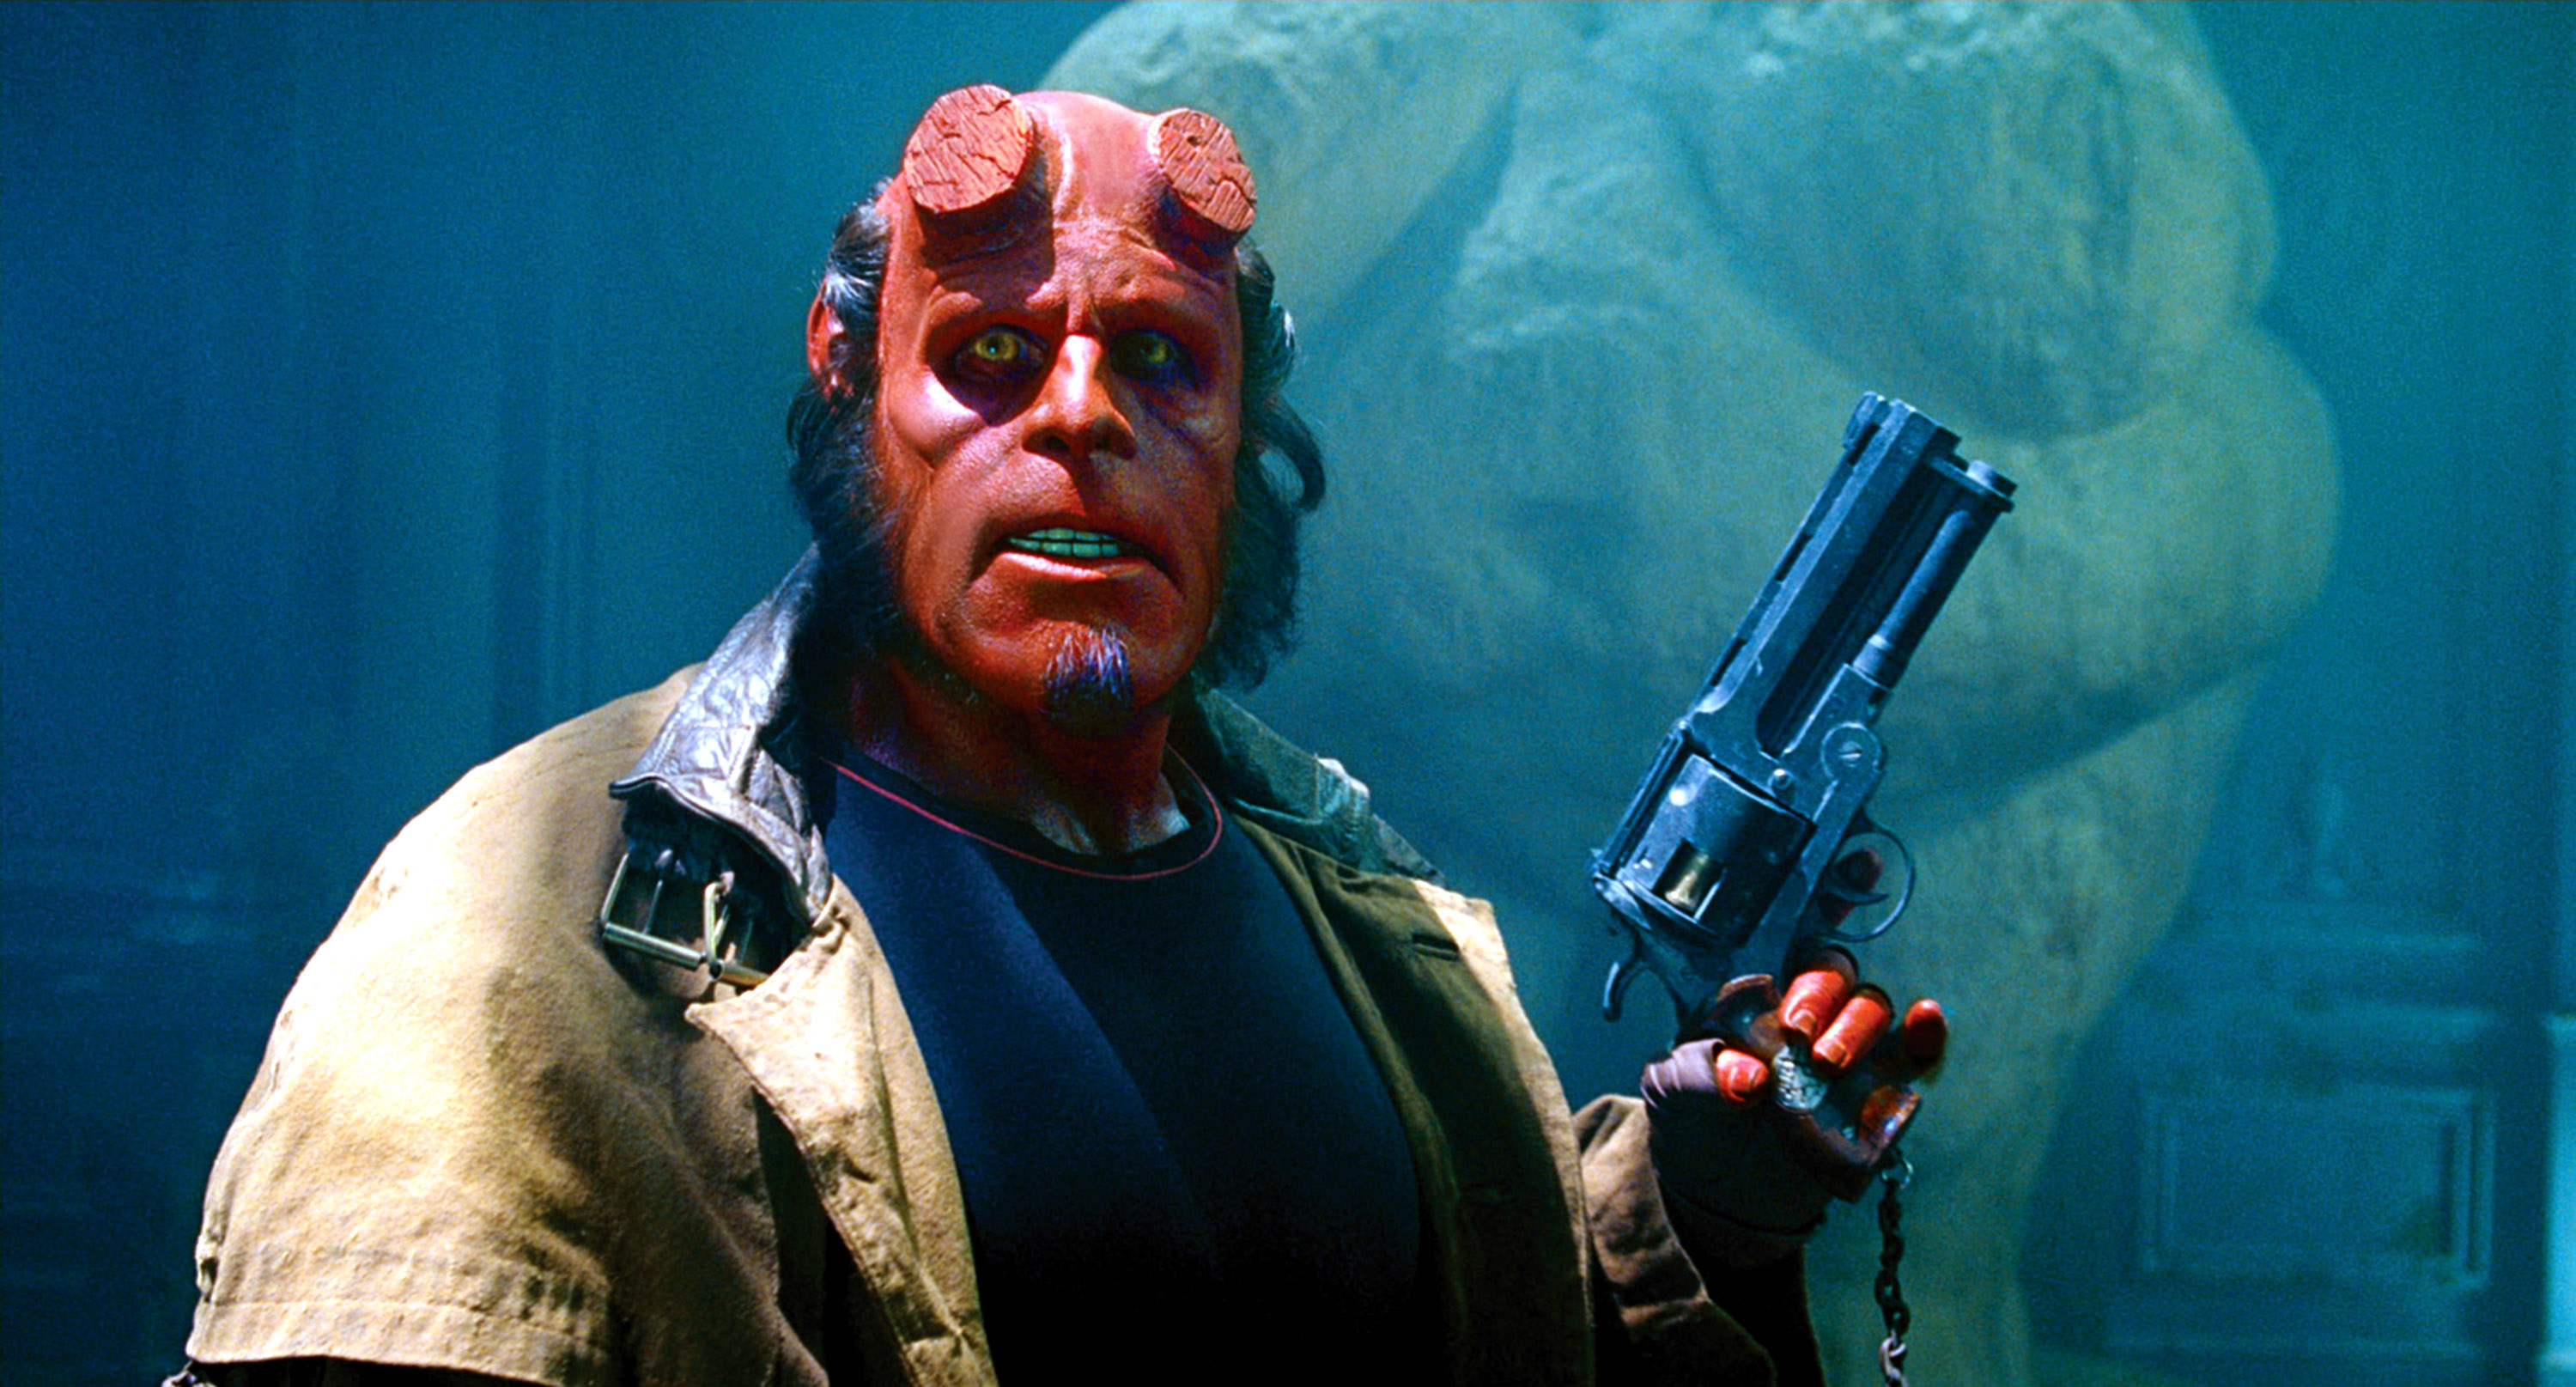 Character Hellboy holding a large gun, standing in a dimly lit, smoky room